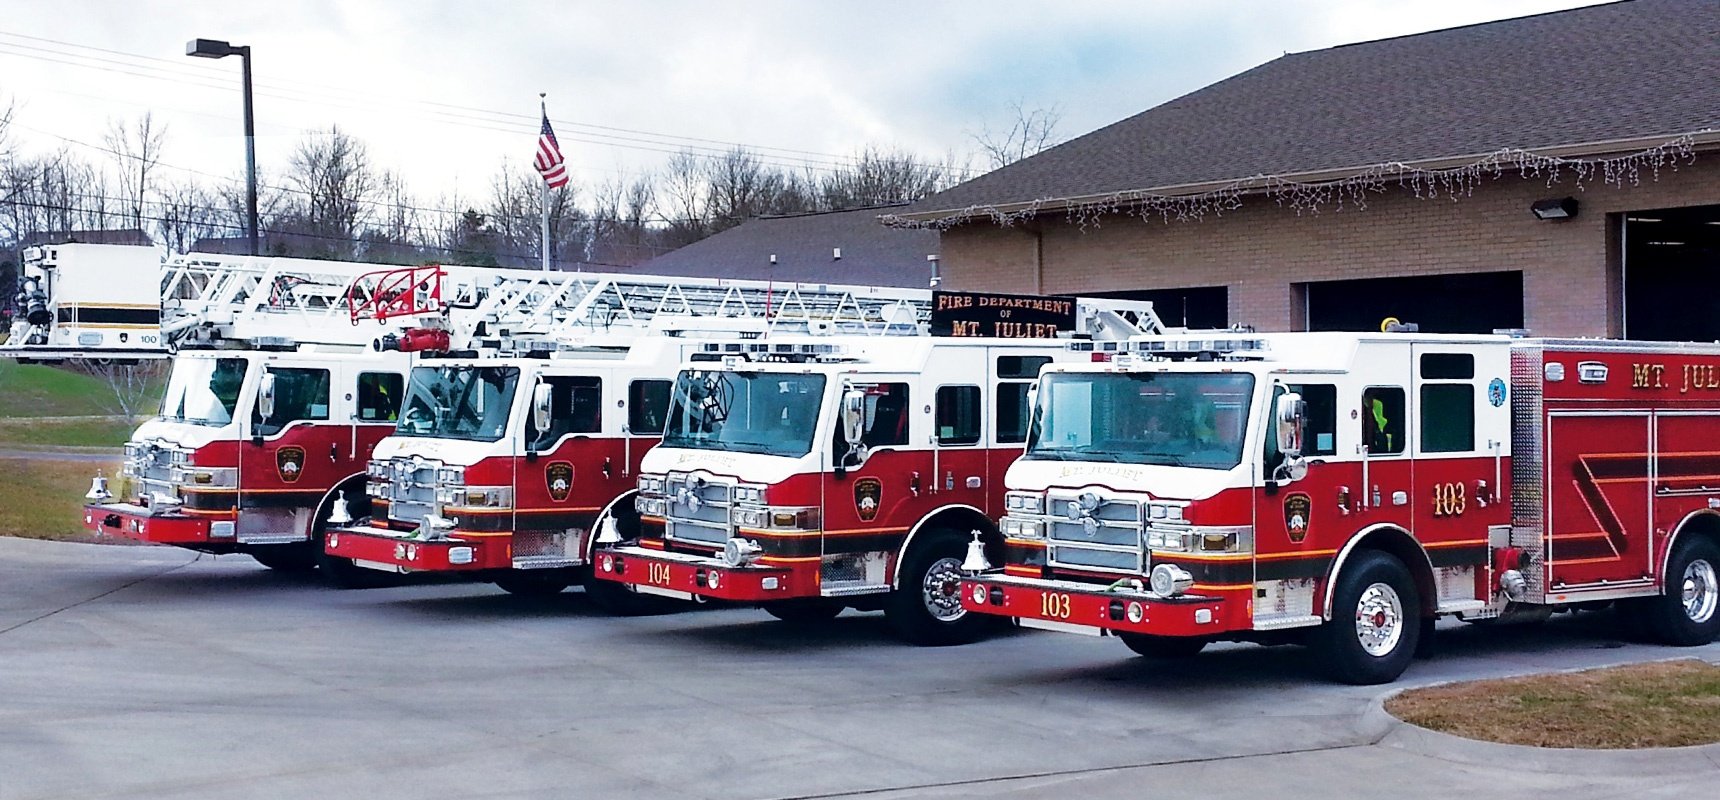 Pierce-Delivers-Four-Apparatus-to-Mt.-Juliet,-Tennessee;-Brand-New-Department-Serves-Fast-Growing-Community_Header.jpg